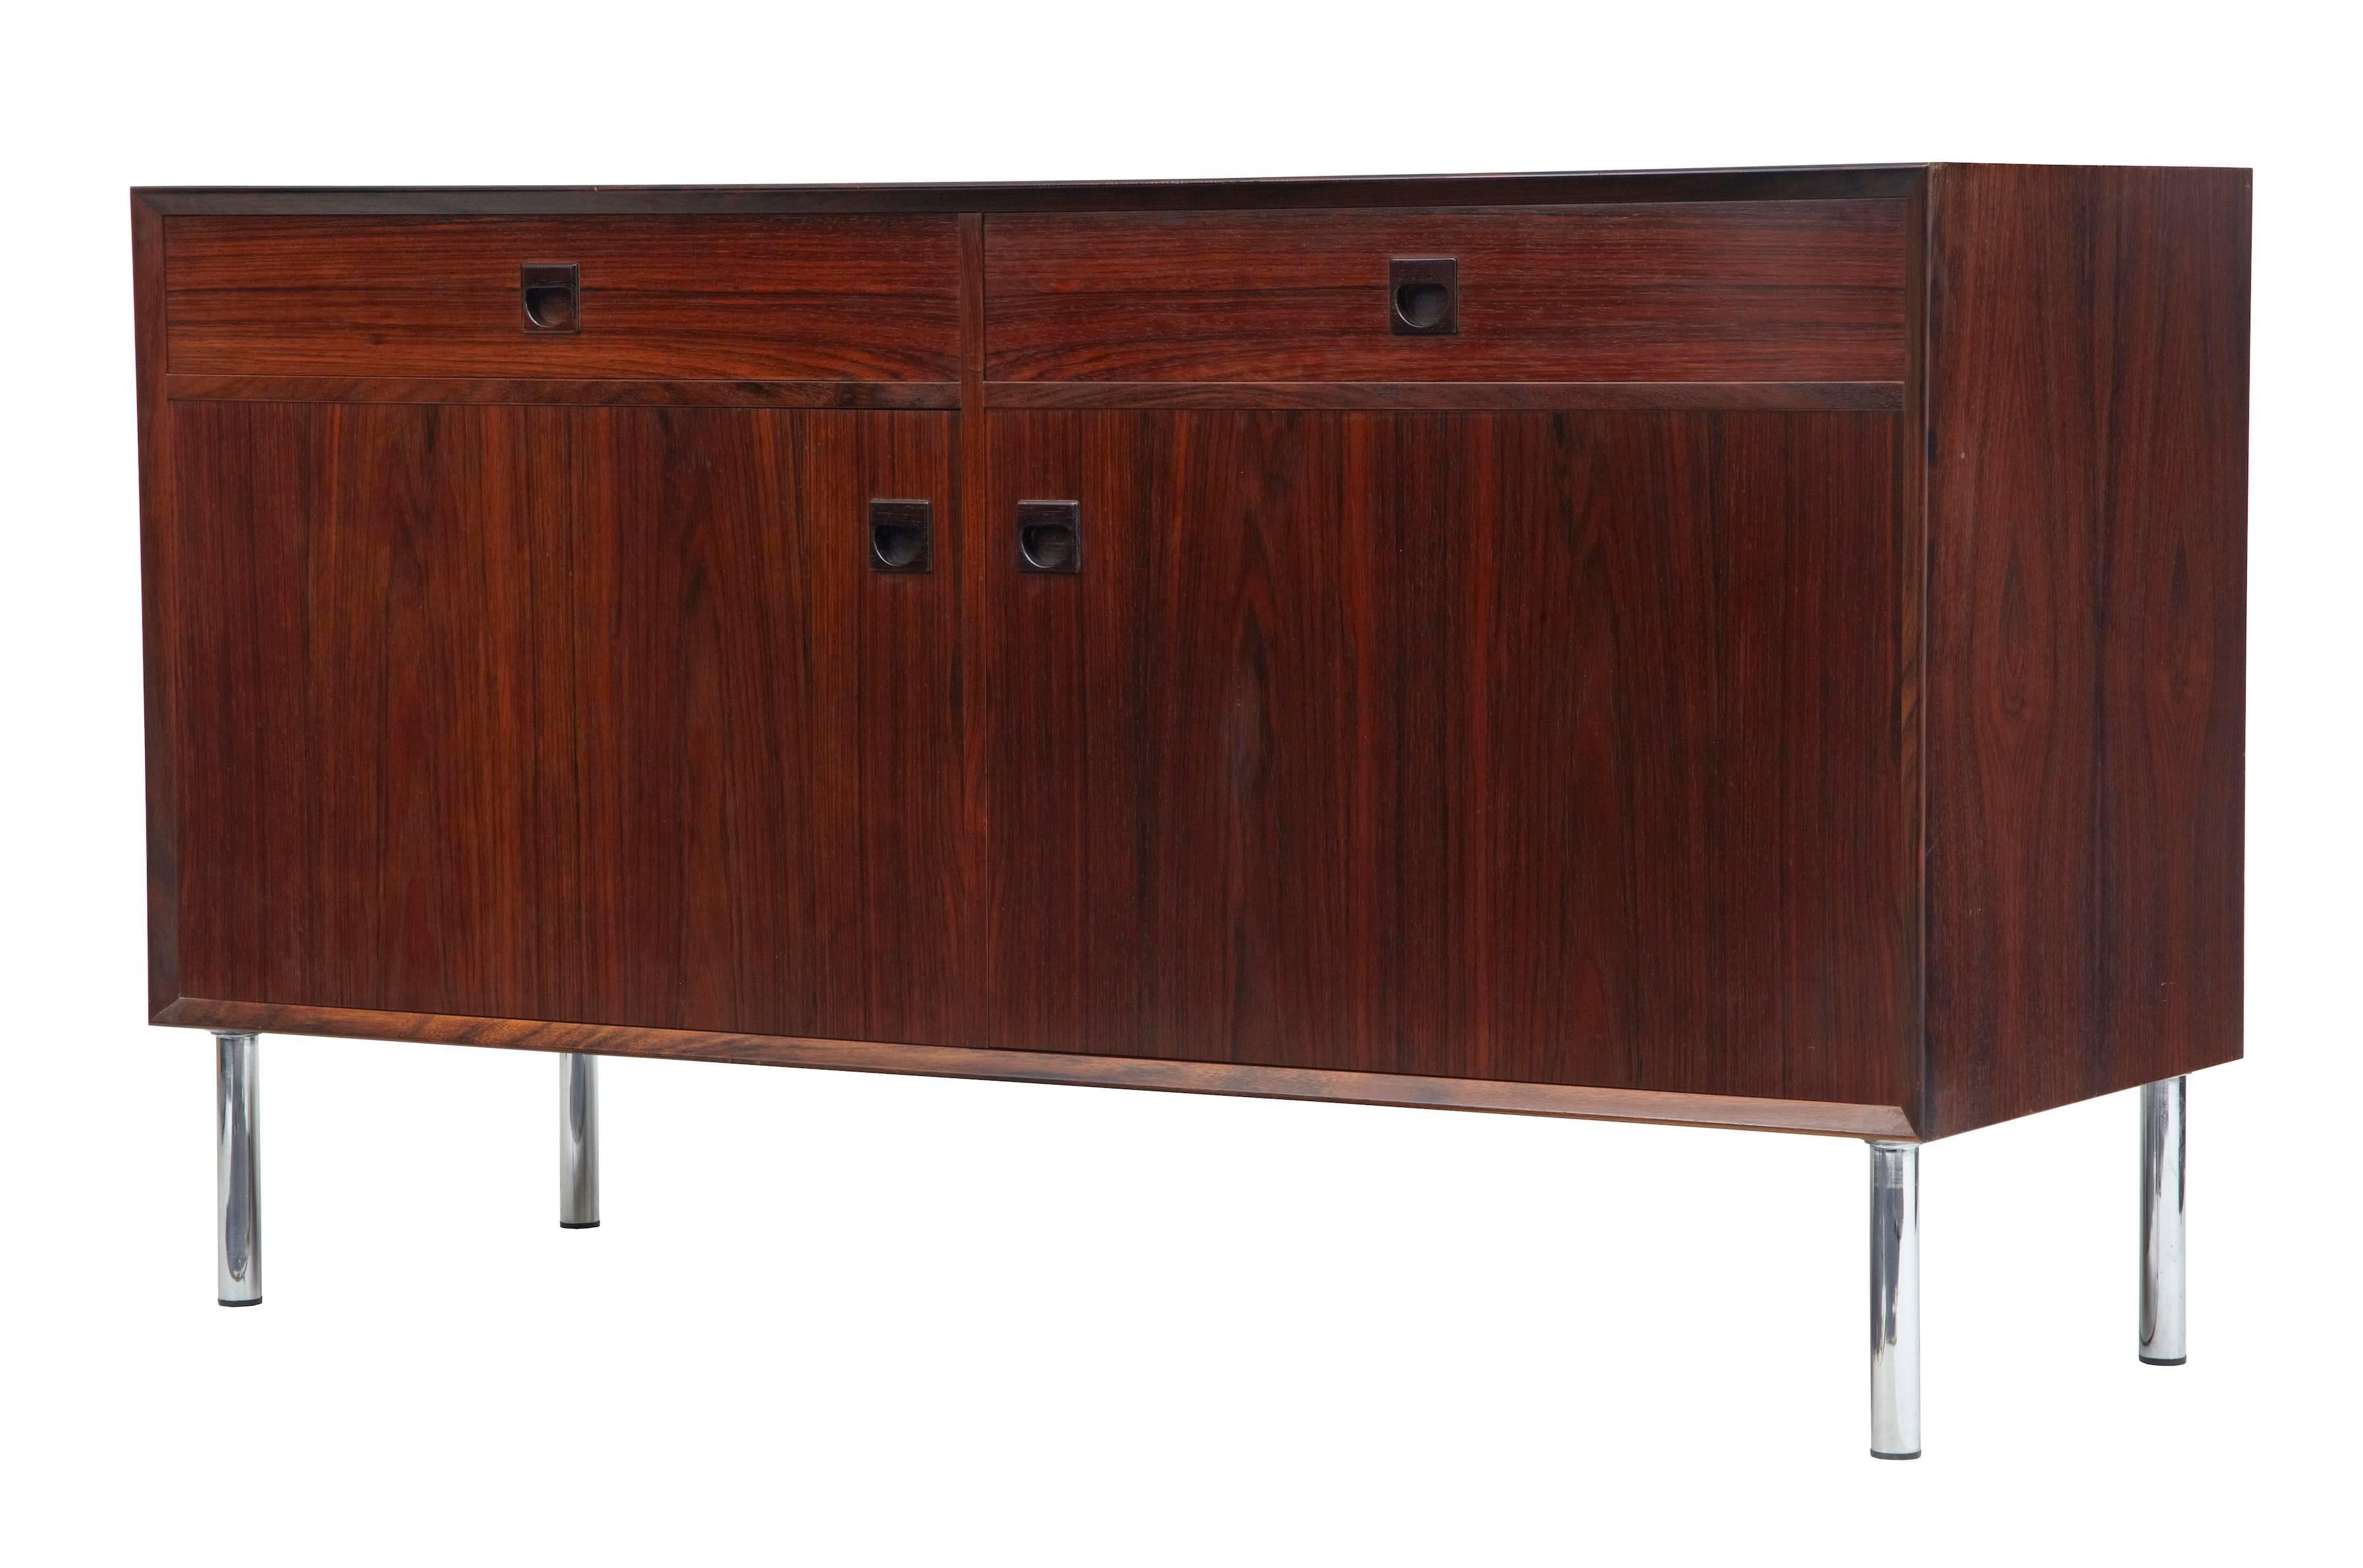 1960s rosewood buffet of good quality.
Fine rosewood veneers.
Two drawers over a double door cupboard.
Standing on chromed legs.
Some surface marks and fading to top and side.

Measures: Height: 30 3/4